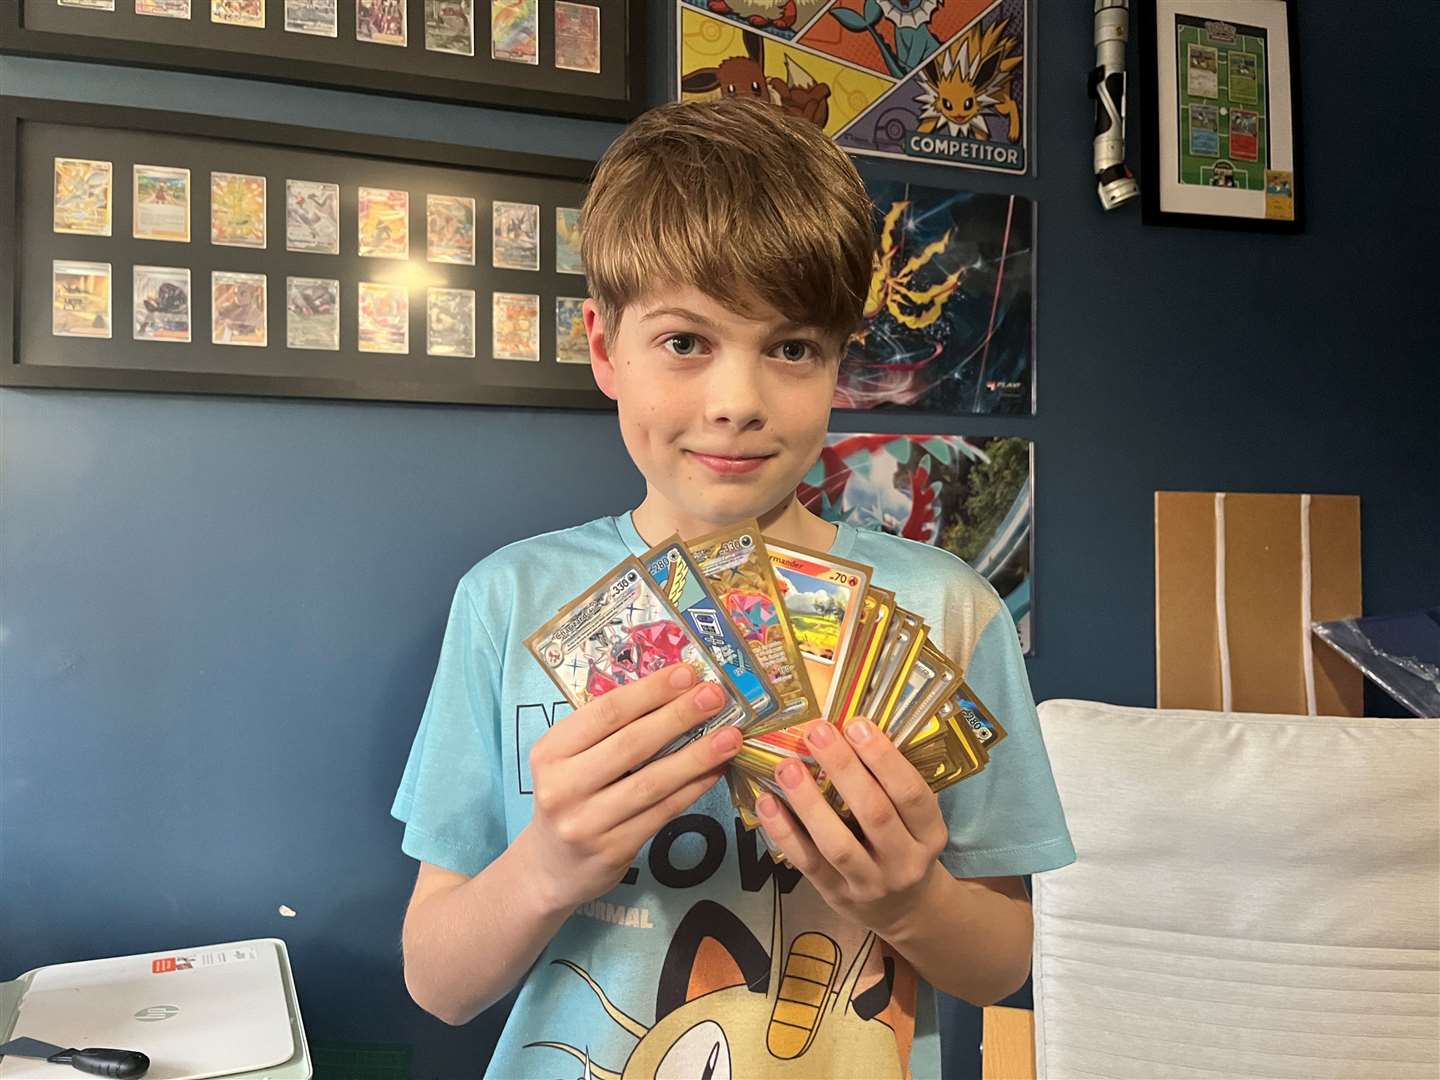 Harrison says he has about 10,000 Pokémon cards in his collection